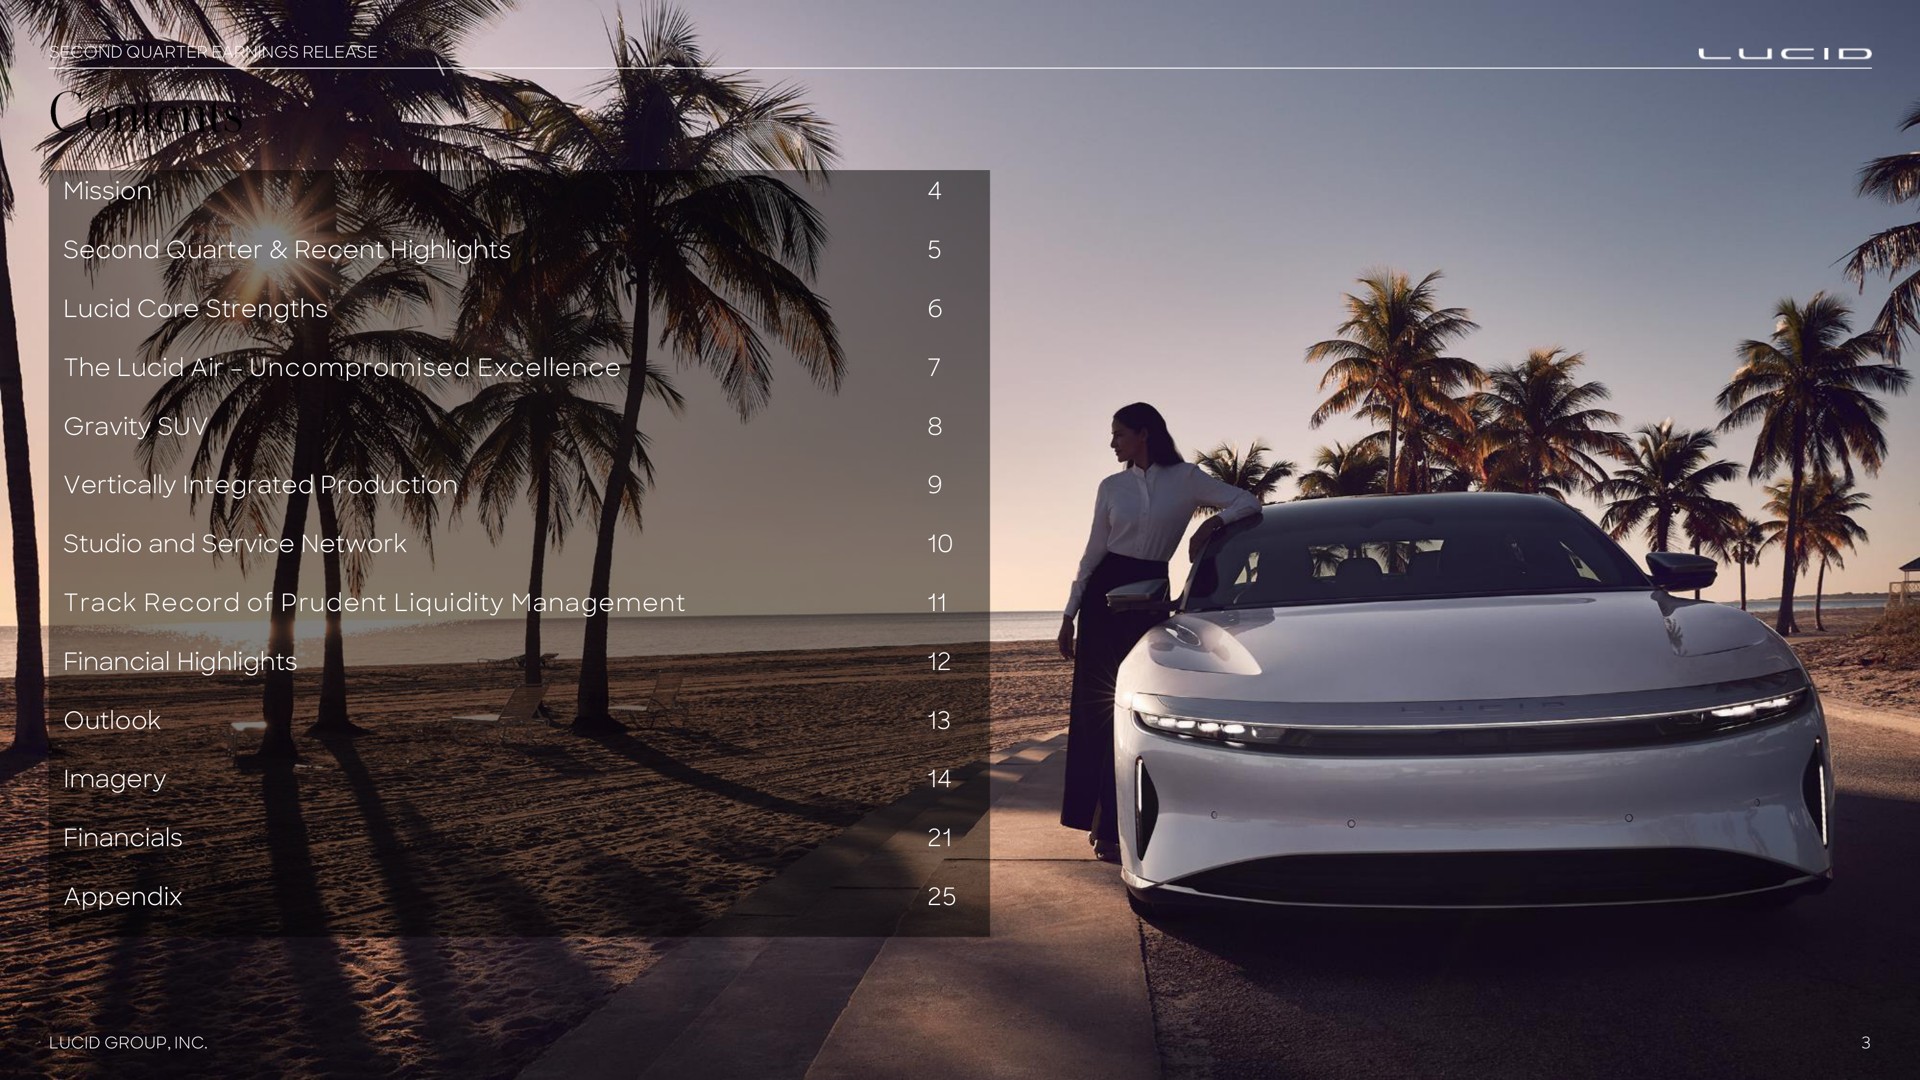 mission second quarter recent highlights lucid core strengths the lucid air uncompromised excellence gravity vertically integrated production studio and service network track record of prudent liquidity management financial highlights outlook imagery appendix | Lucid Motors